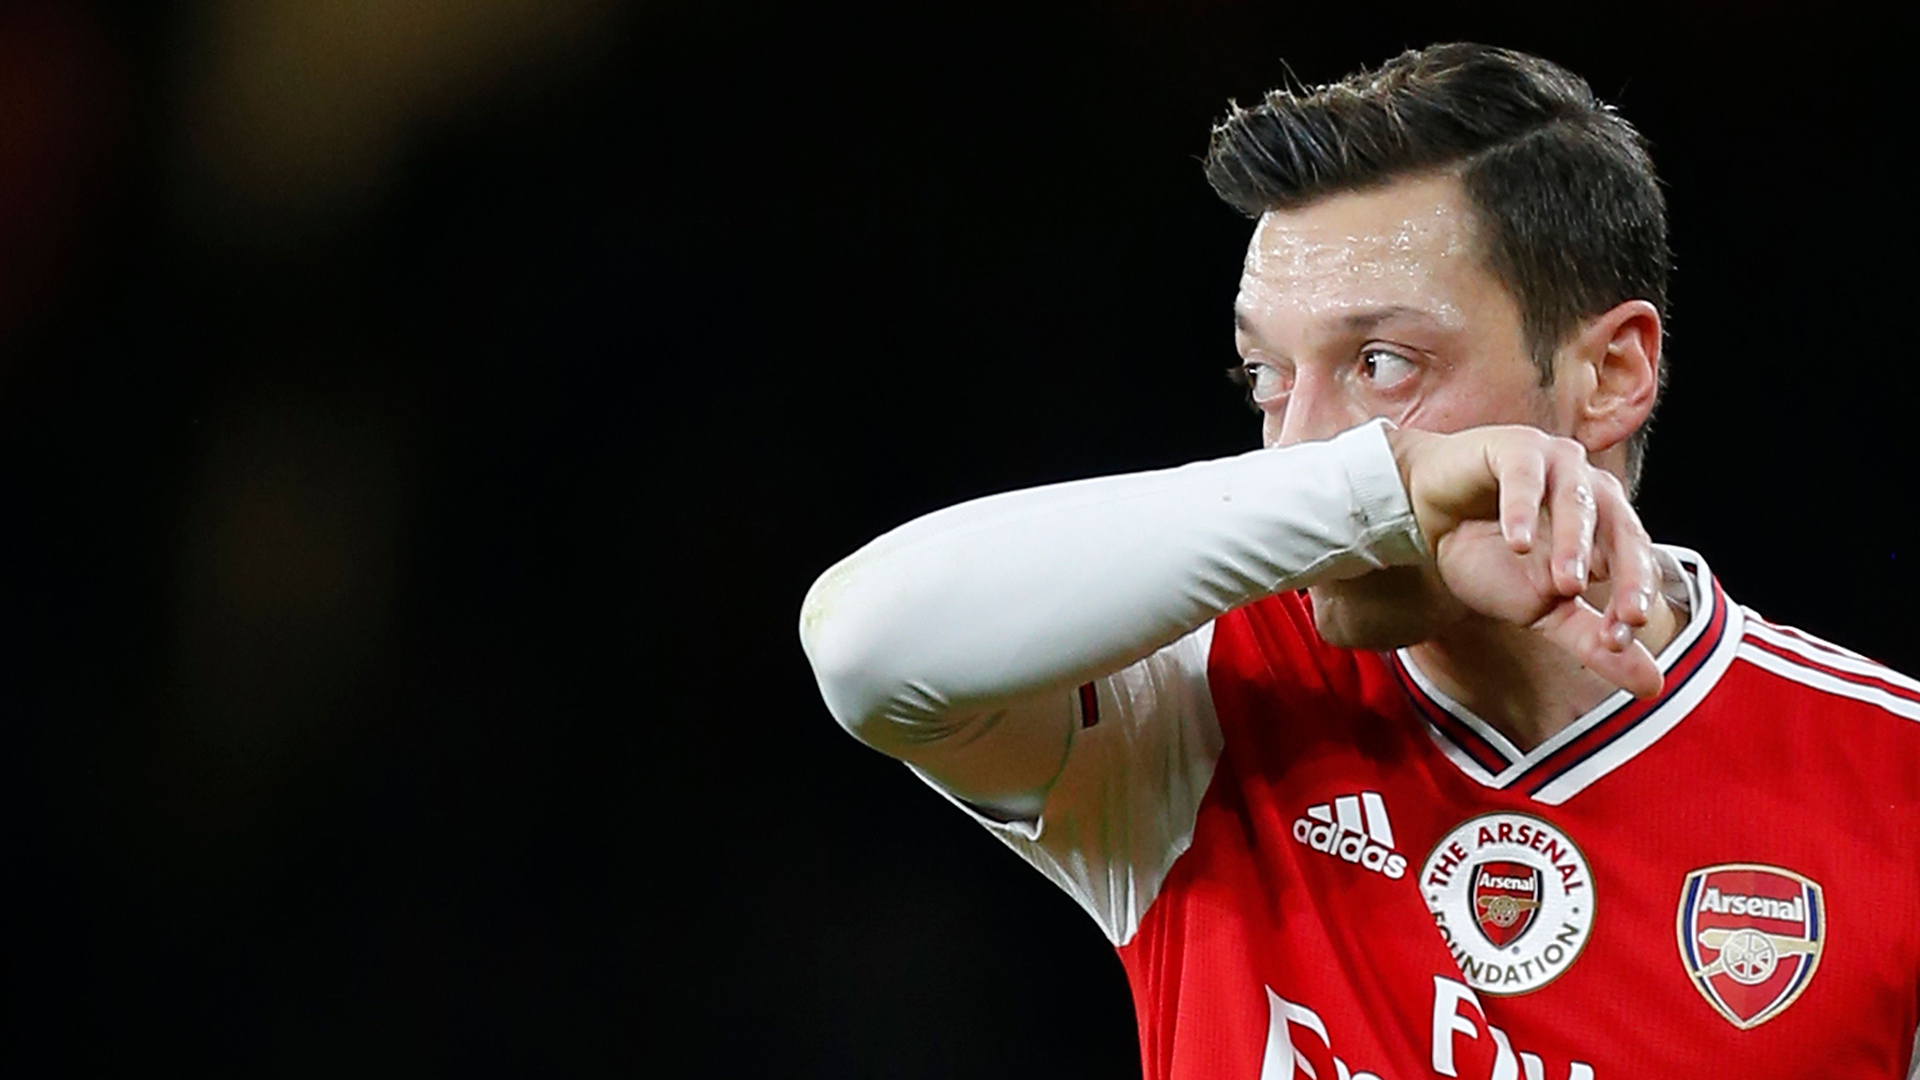 Video: Ozil 'should be annoyed' when substituted - Ljungberg